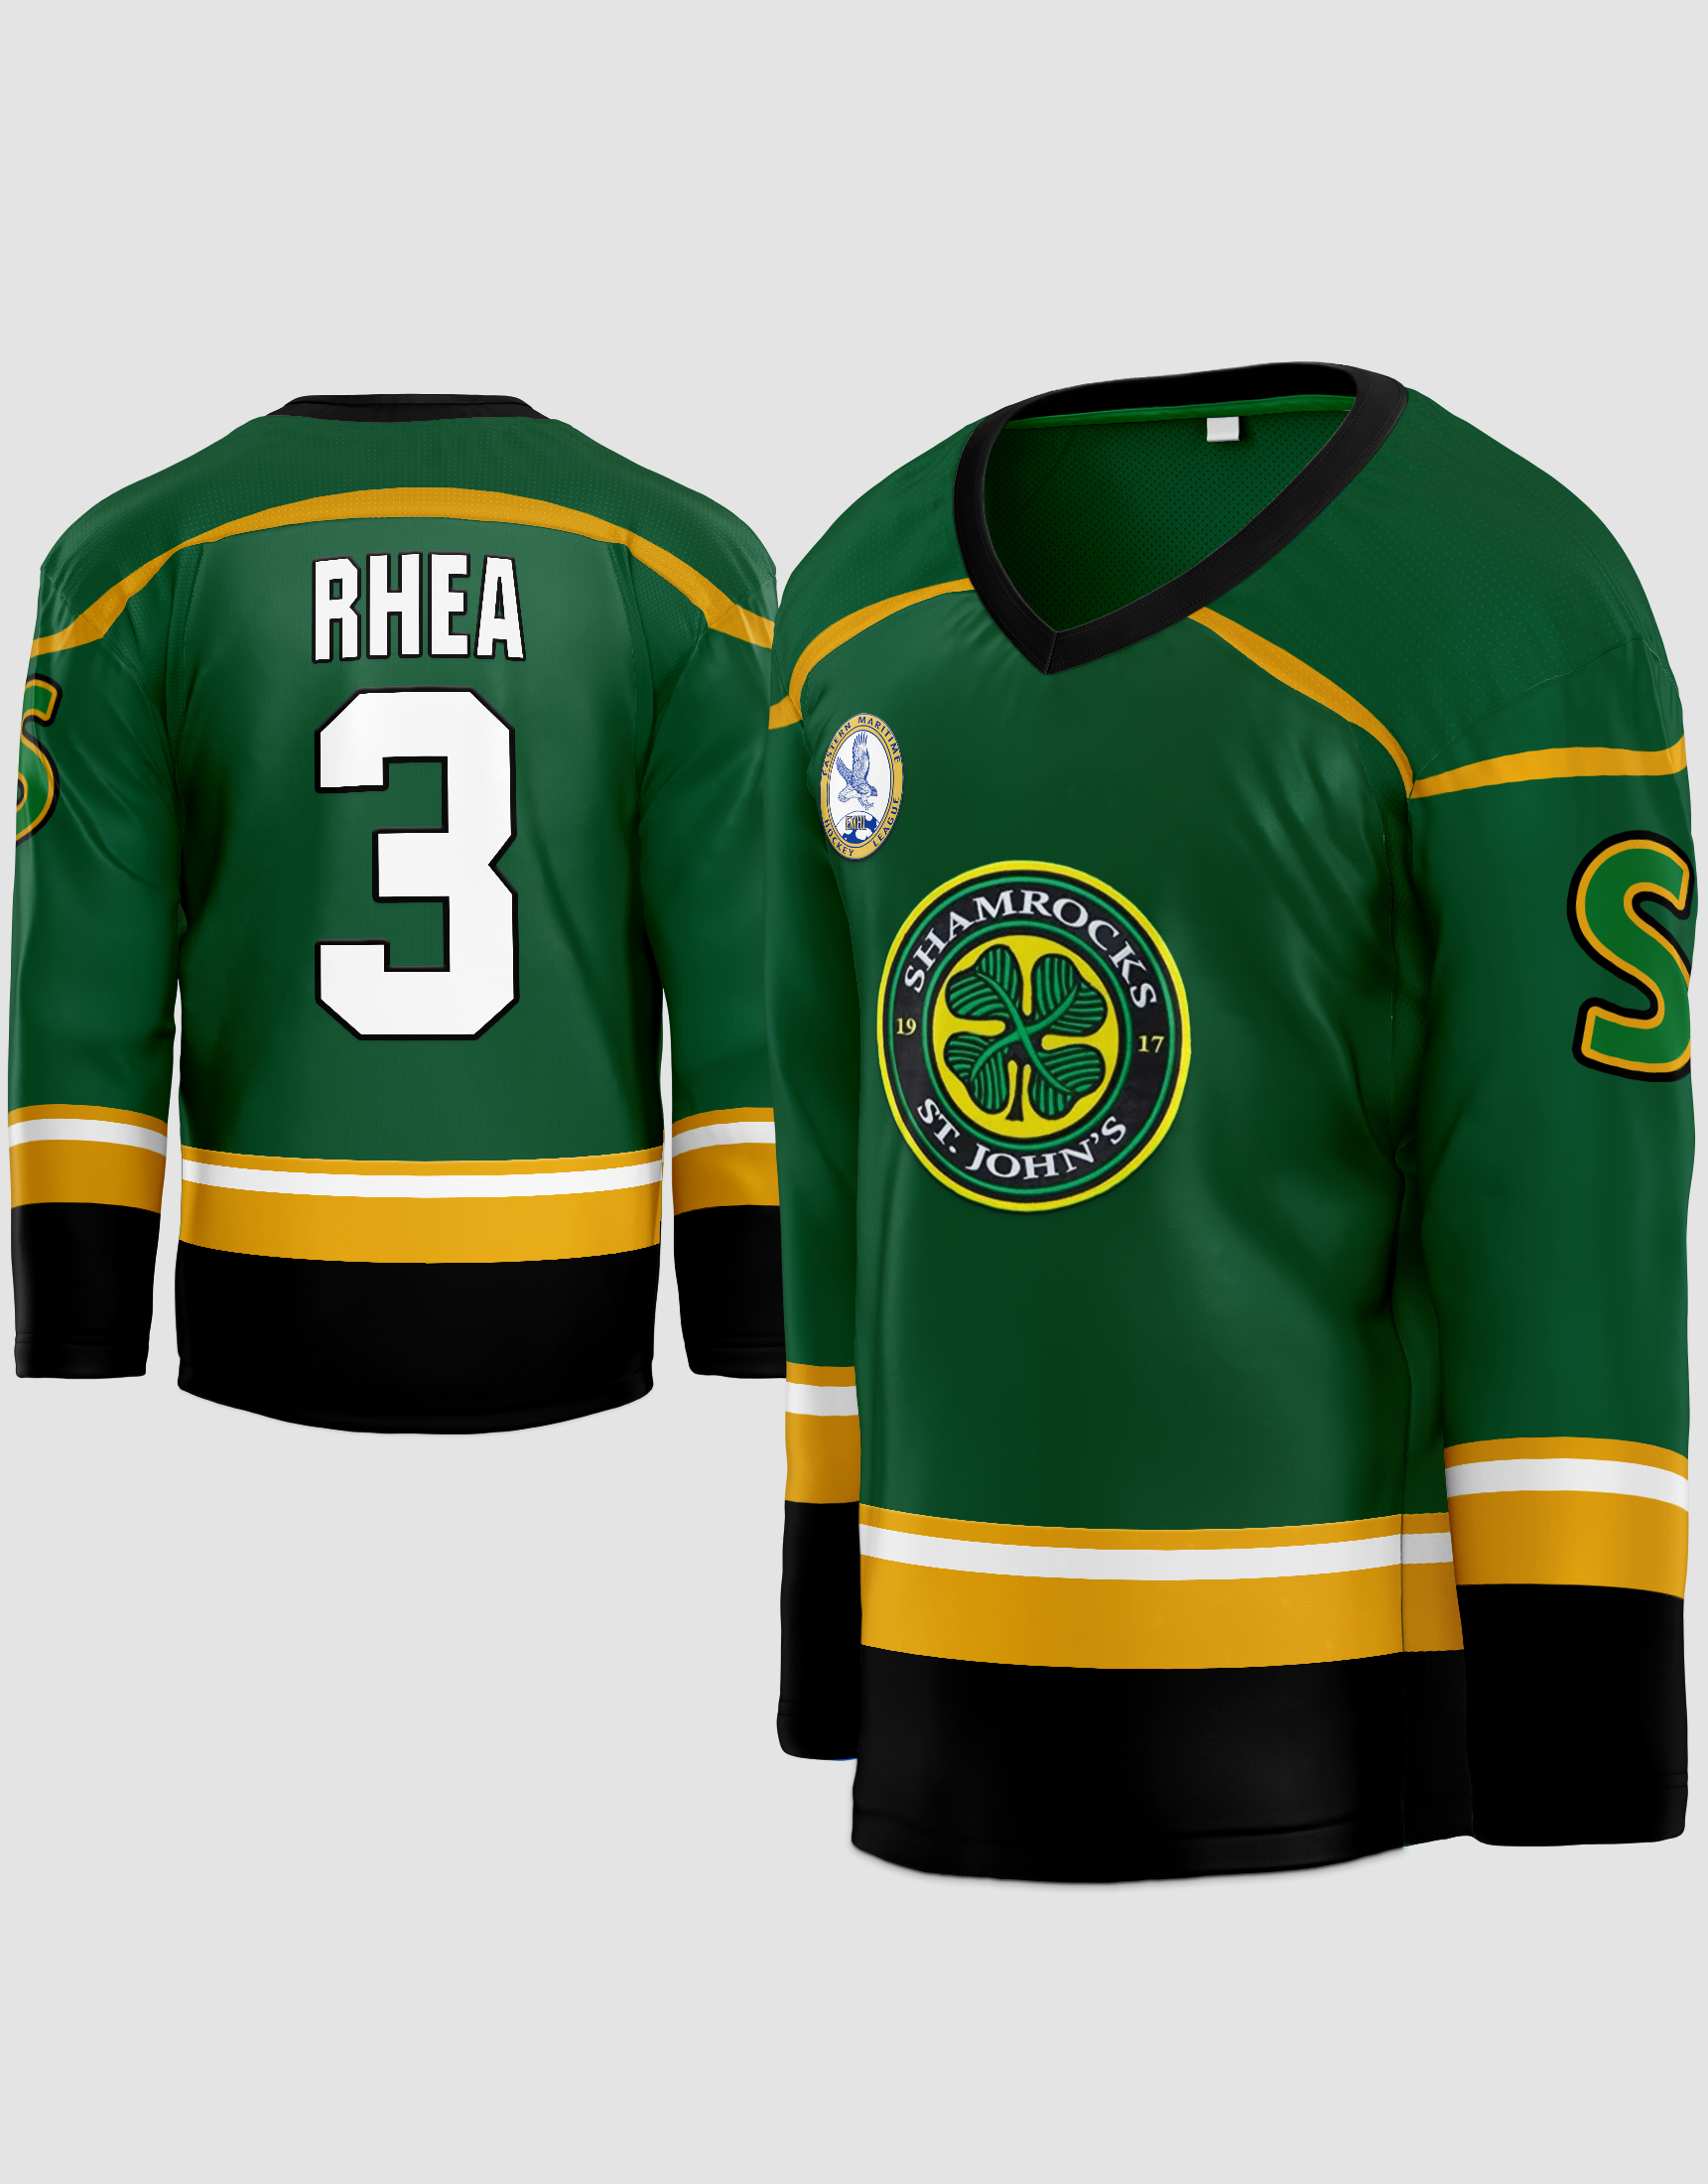 Ross Rhea Jersey 3 St John's Shamrocks Stitched Hockey Jersey Classic  Sweater Stitched Letters Numbers More Color S-3XL - AliExpress